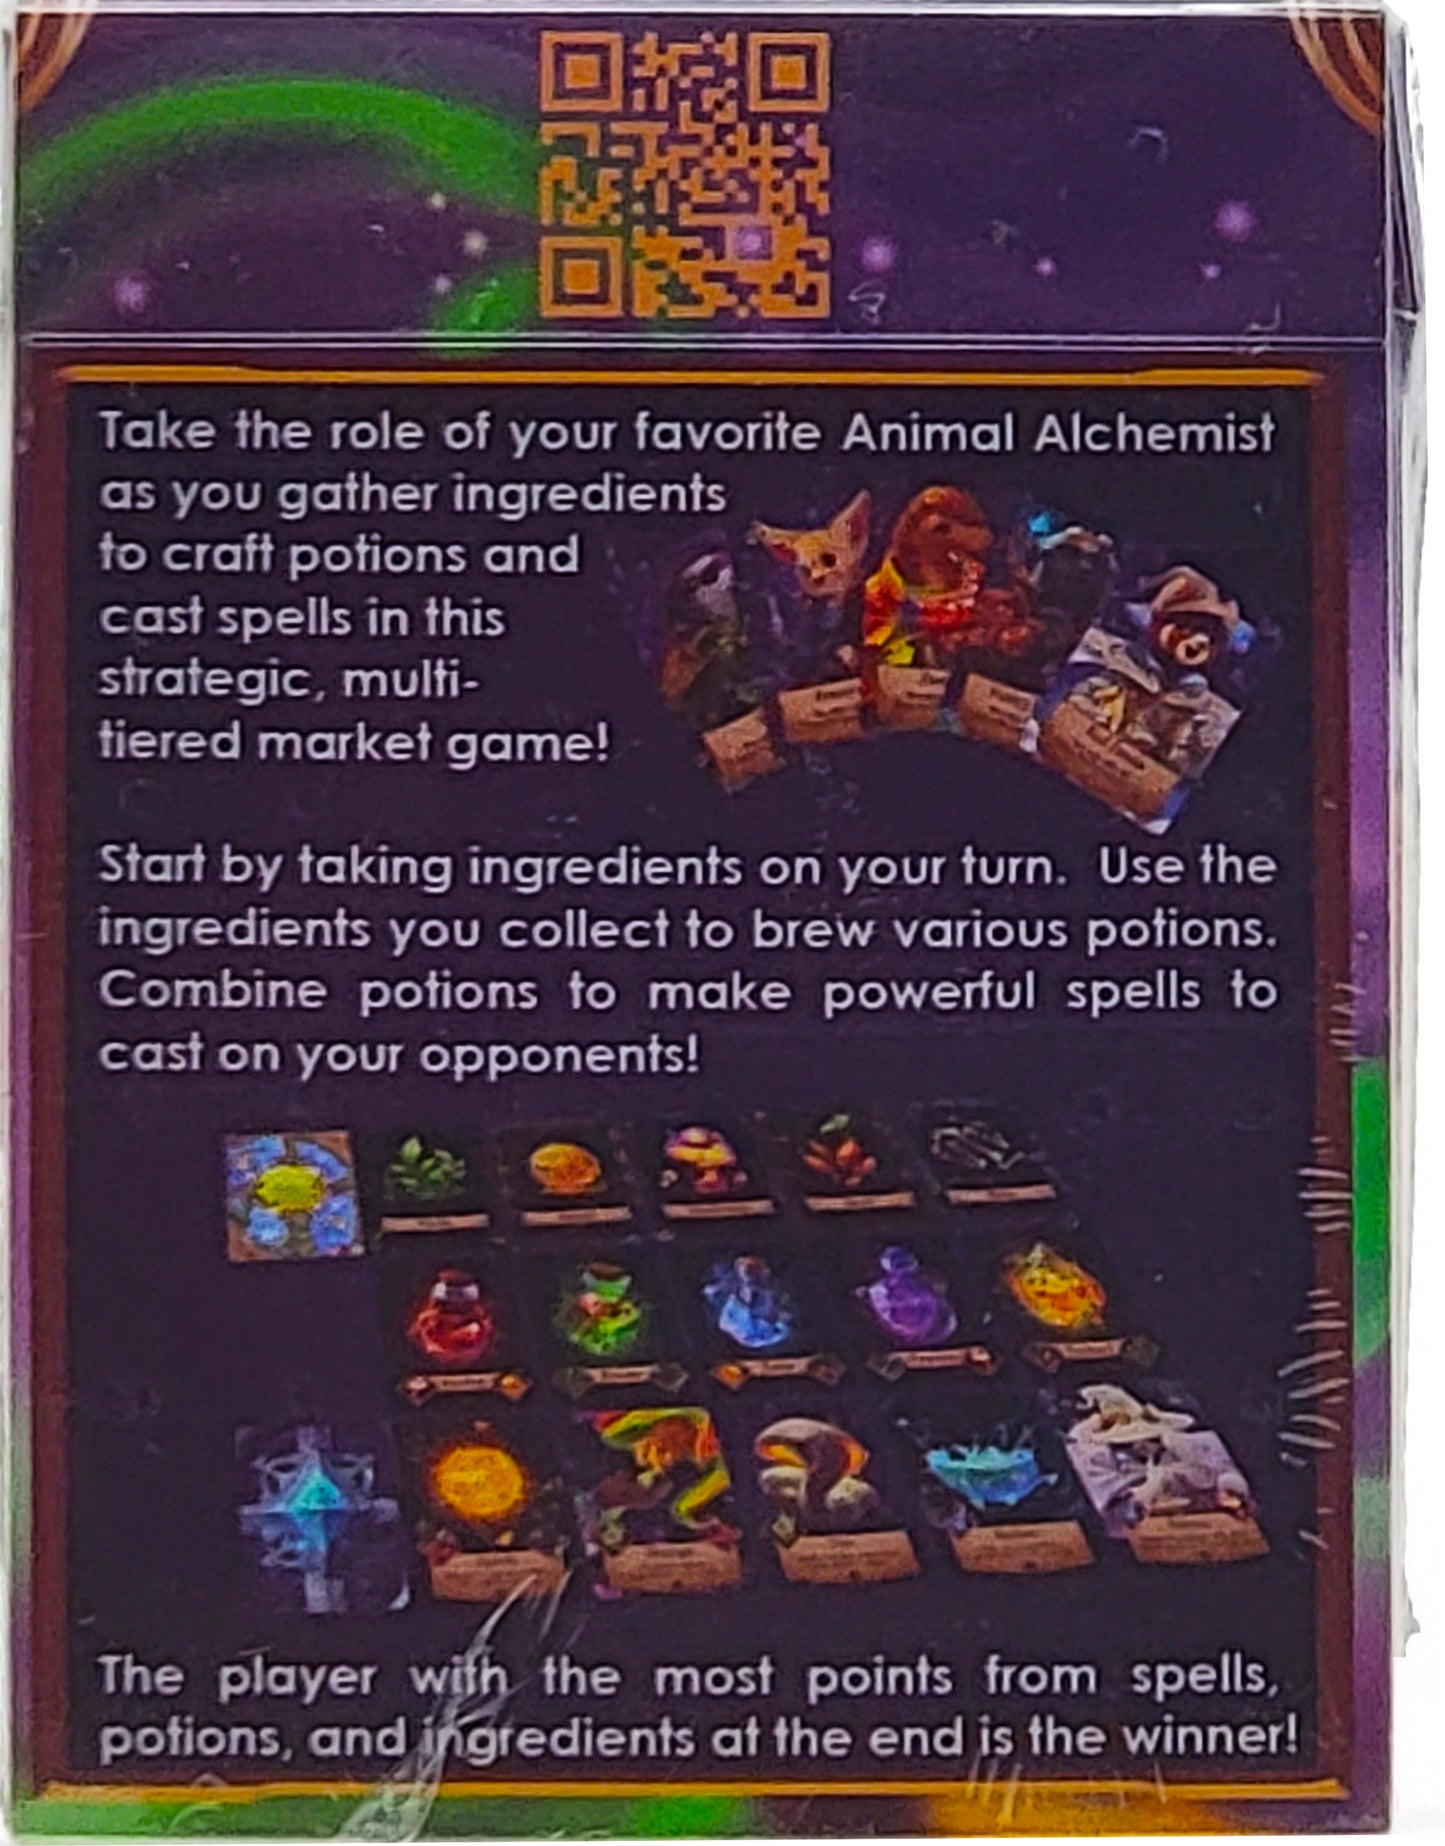 Animalchemists - A Multi-Tiered Market Potion Crafting Game